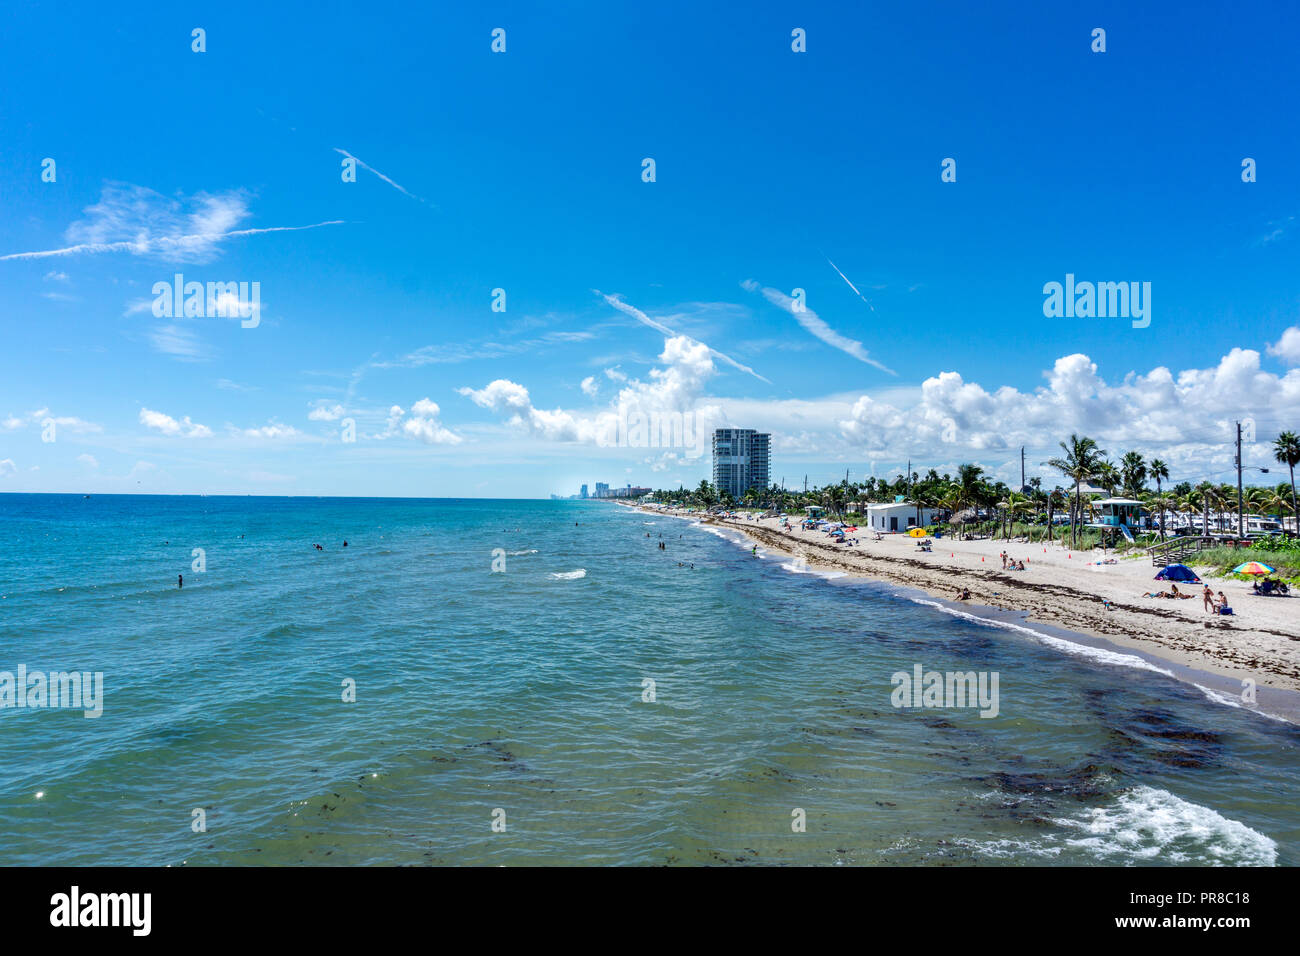 View of Dania beach in Hollywood, Florida. People enjoying their vacation and swimming in the beach in summer Stock Photo